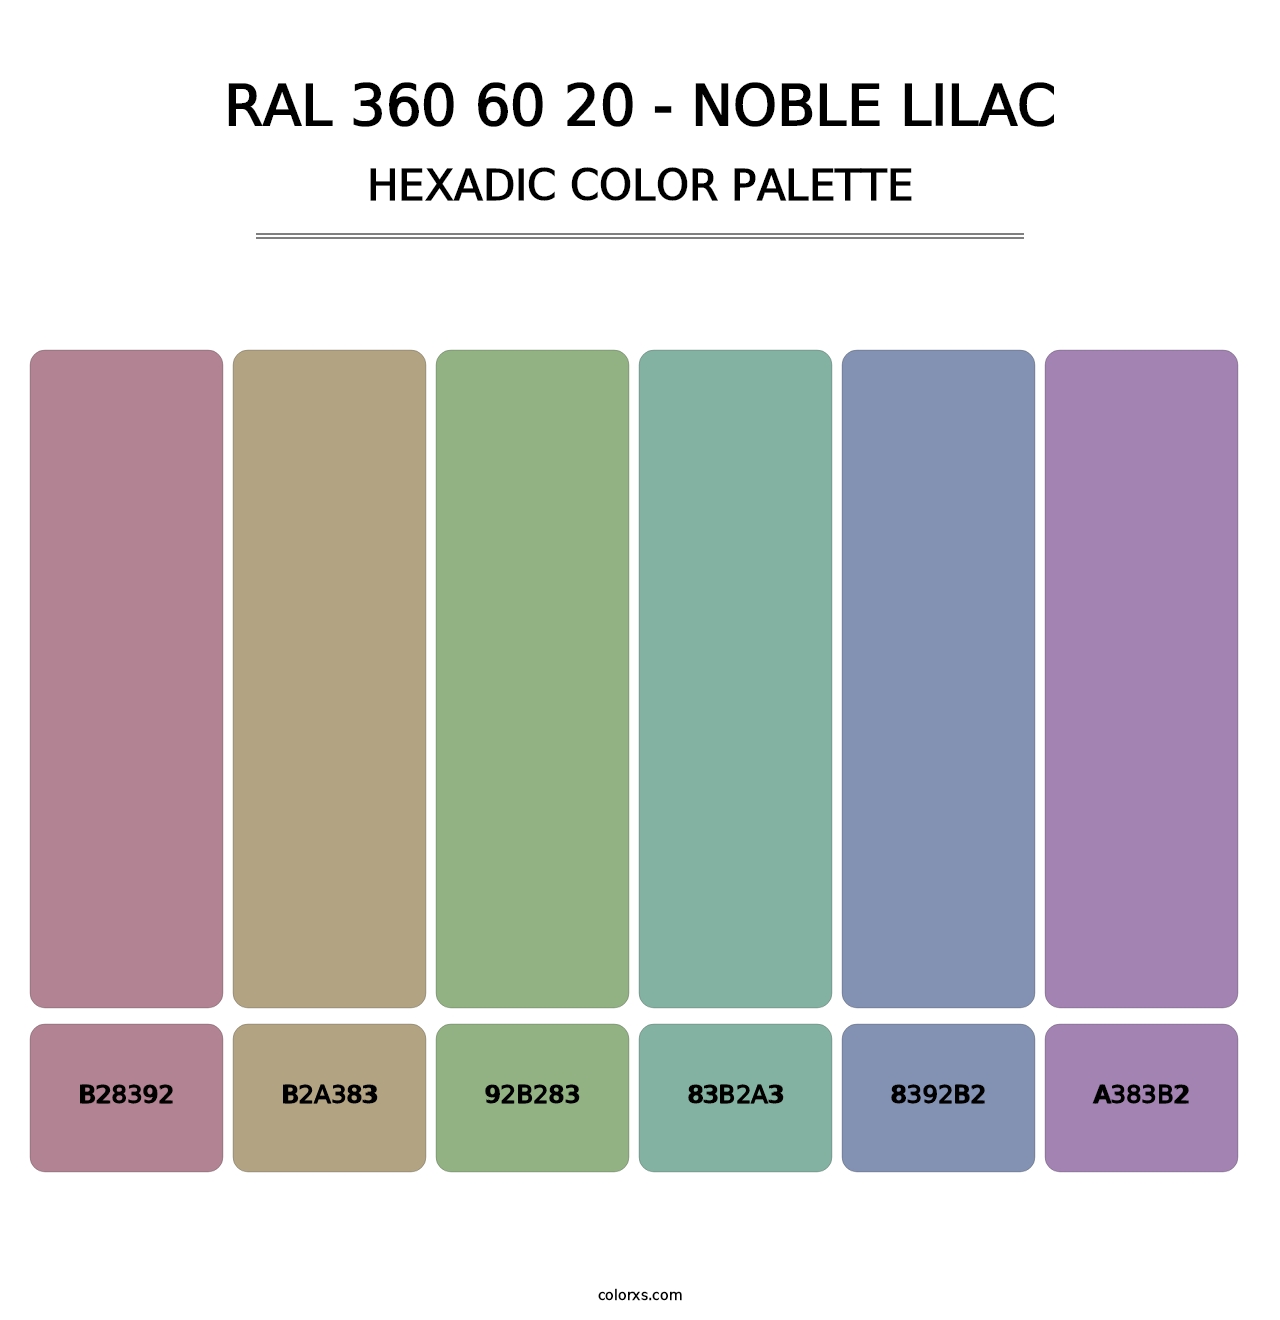 RAL 360 60 20 - Noble Lilac - Hexadic Color Palette